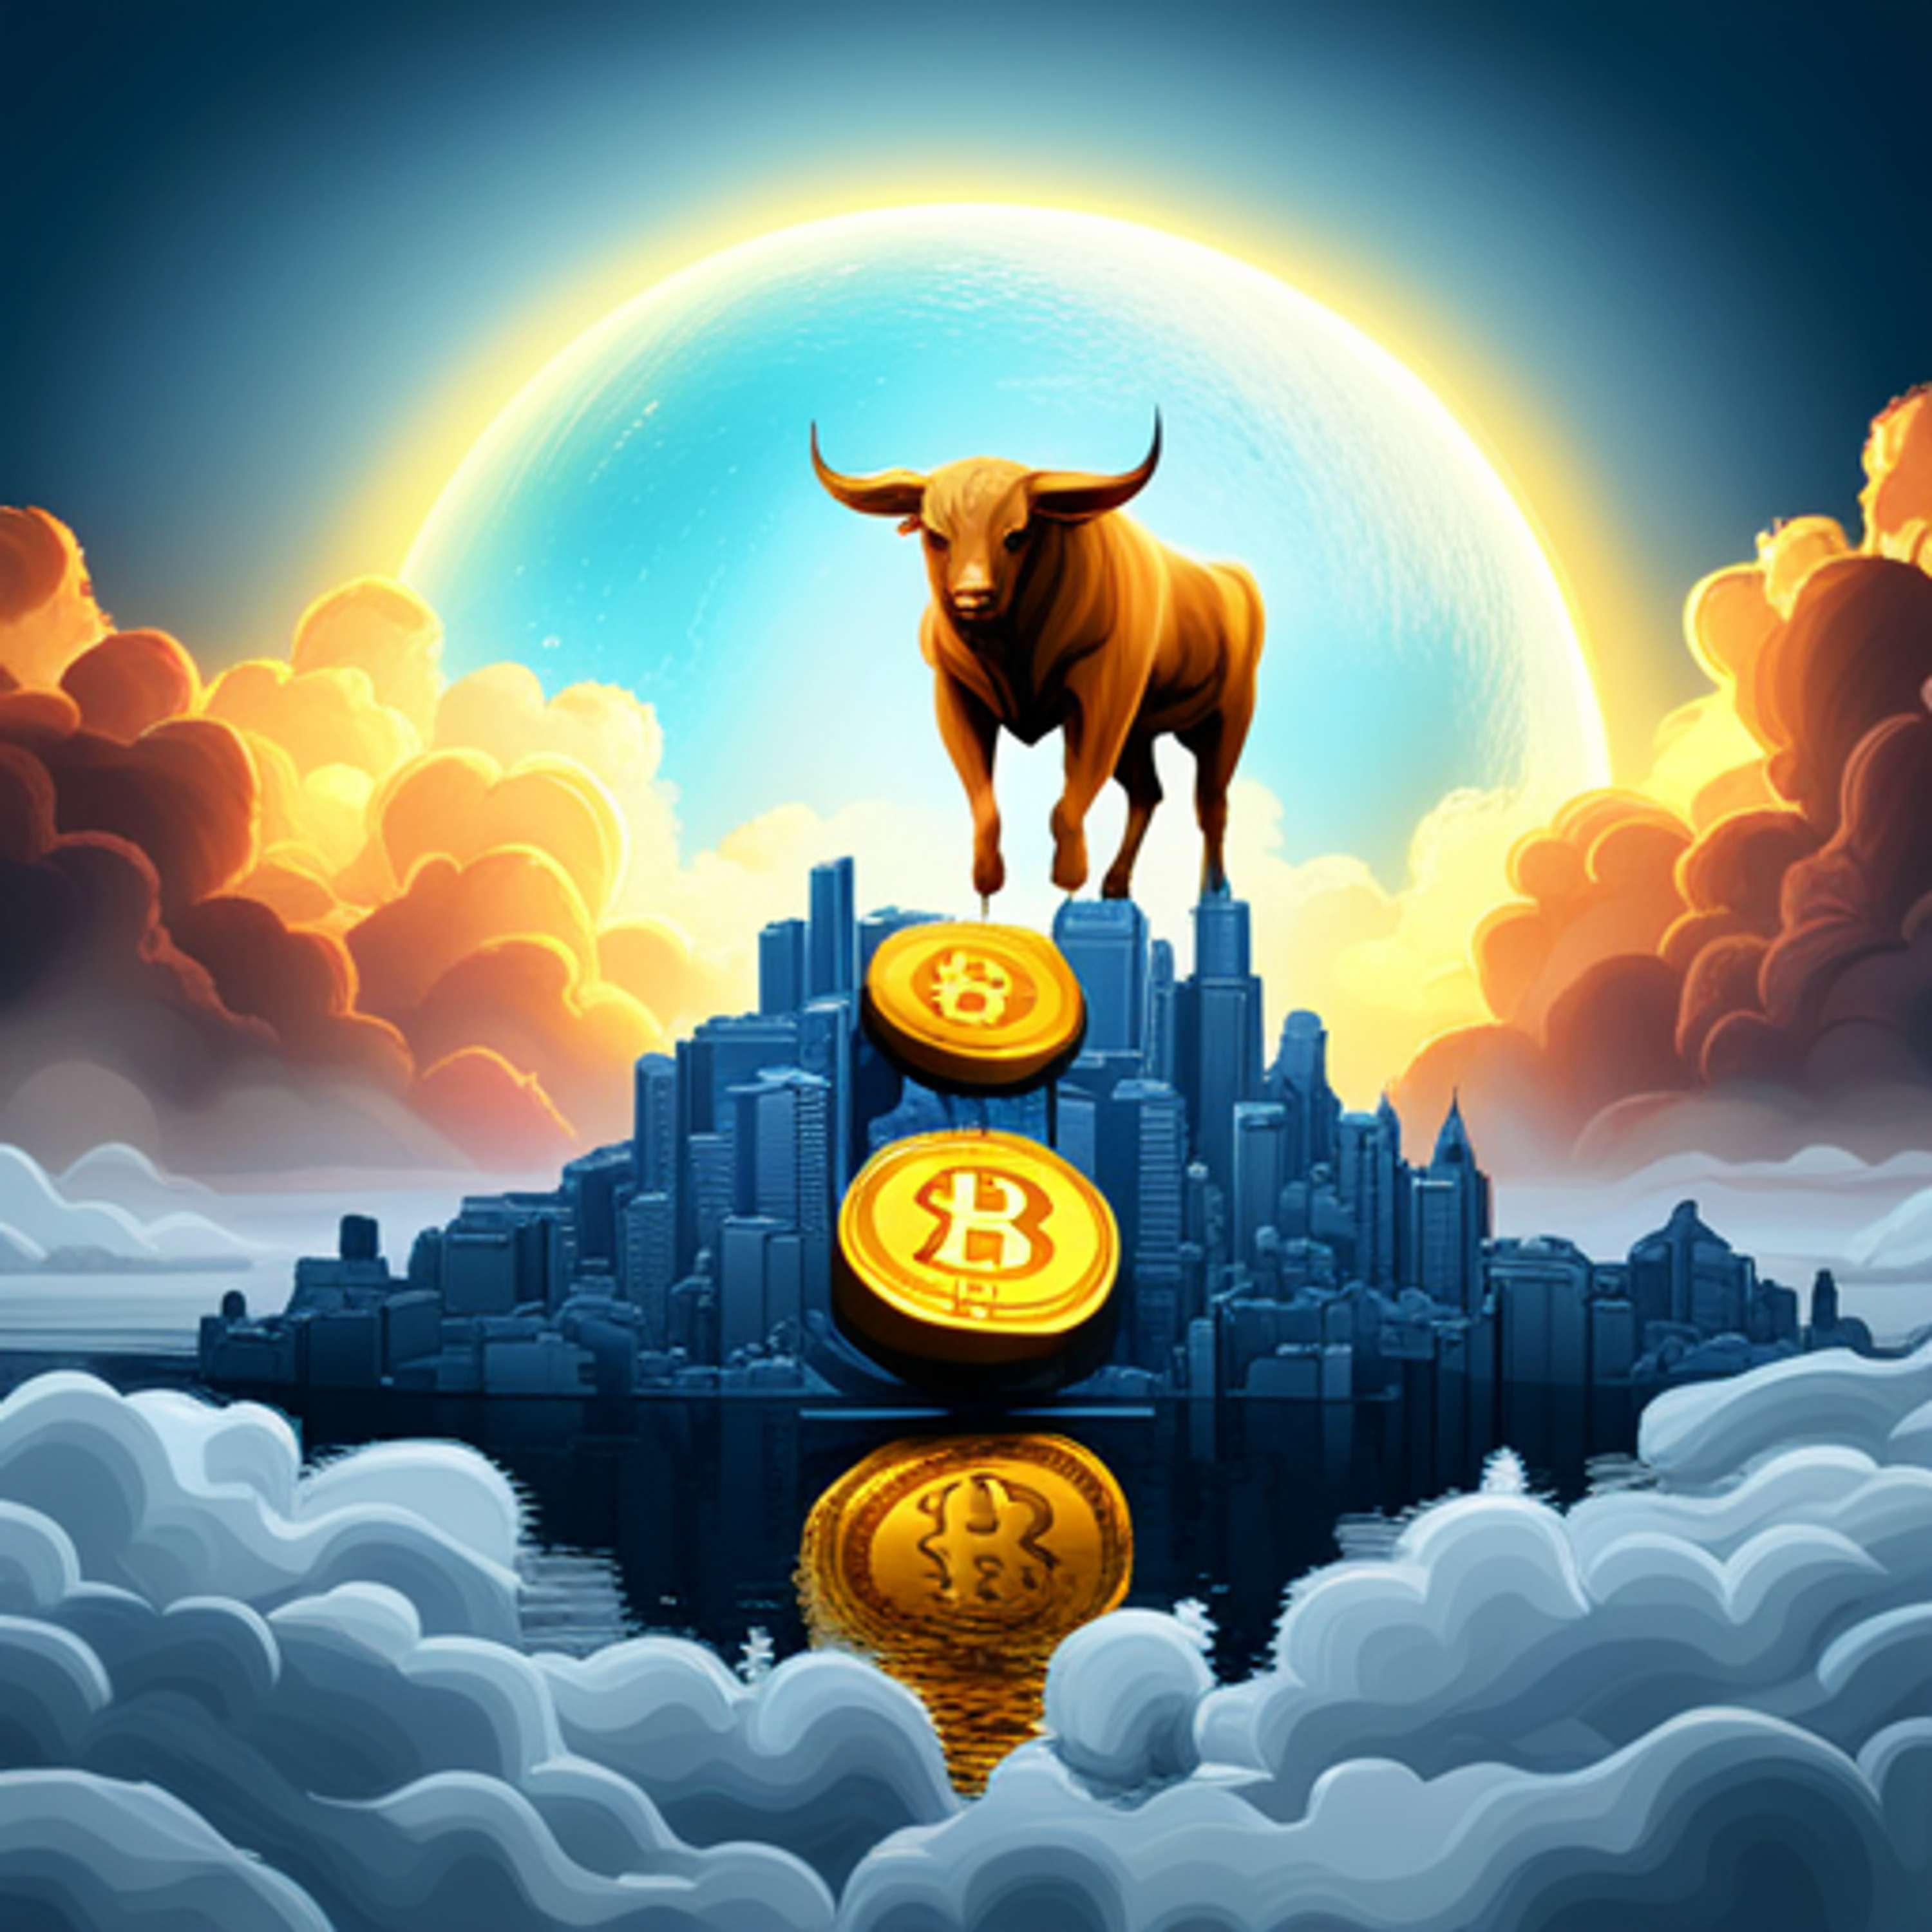 Crypto Bull Market Over? Experts Weigh In